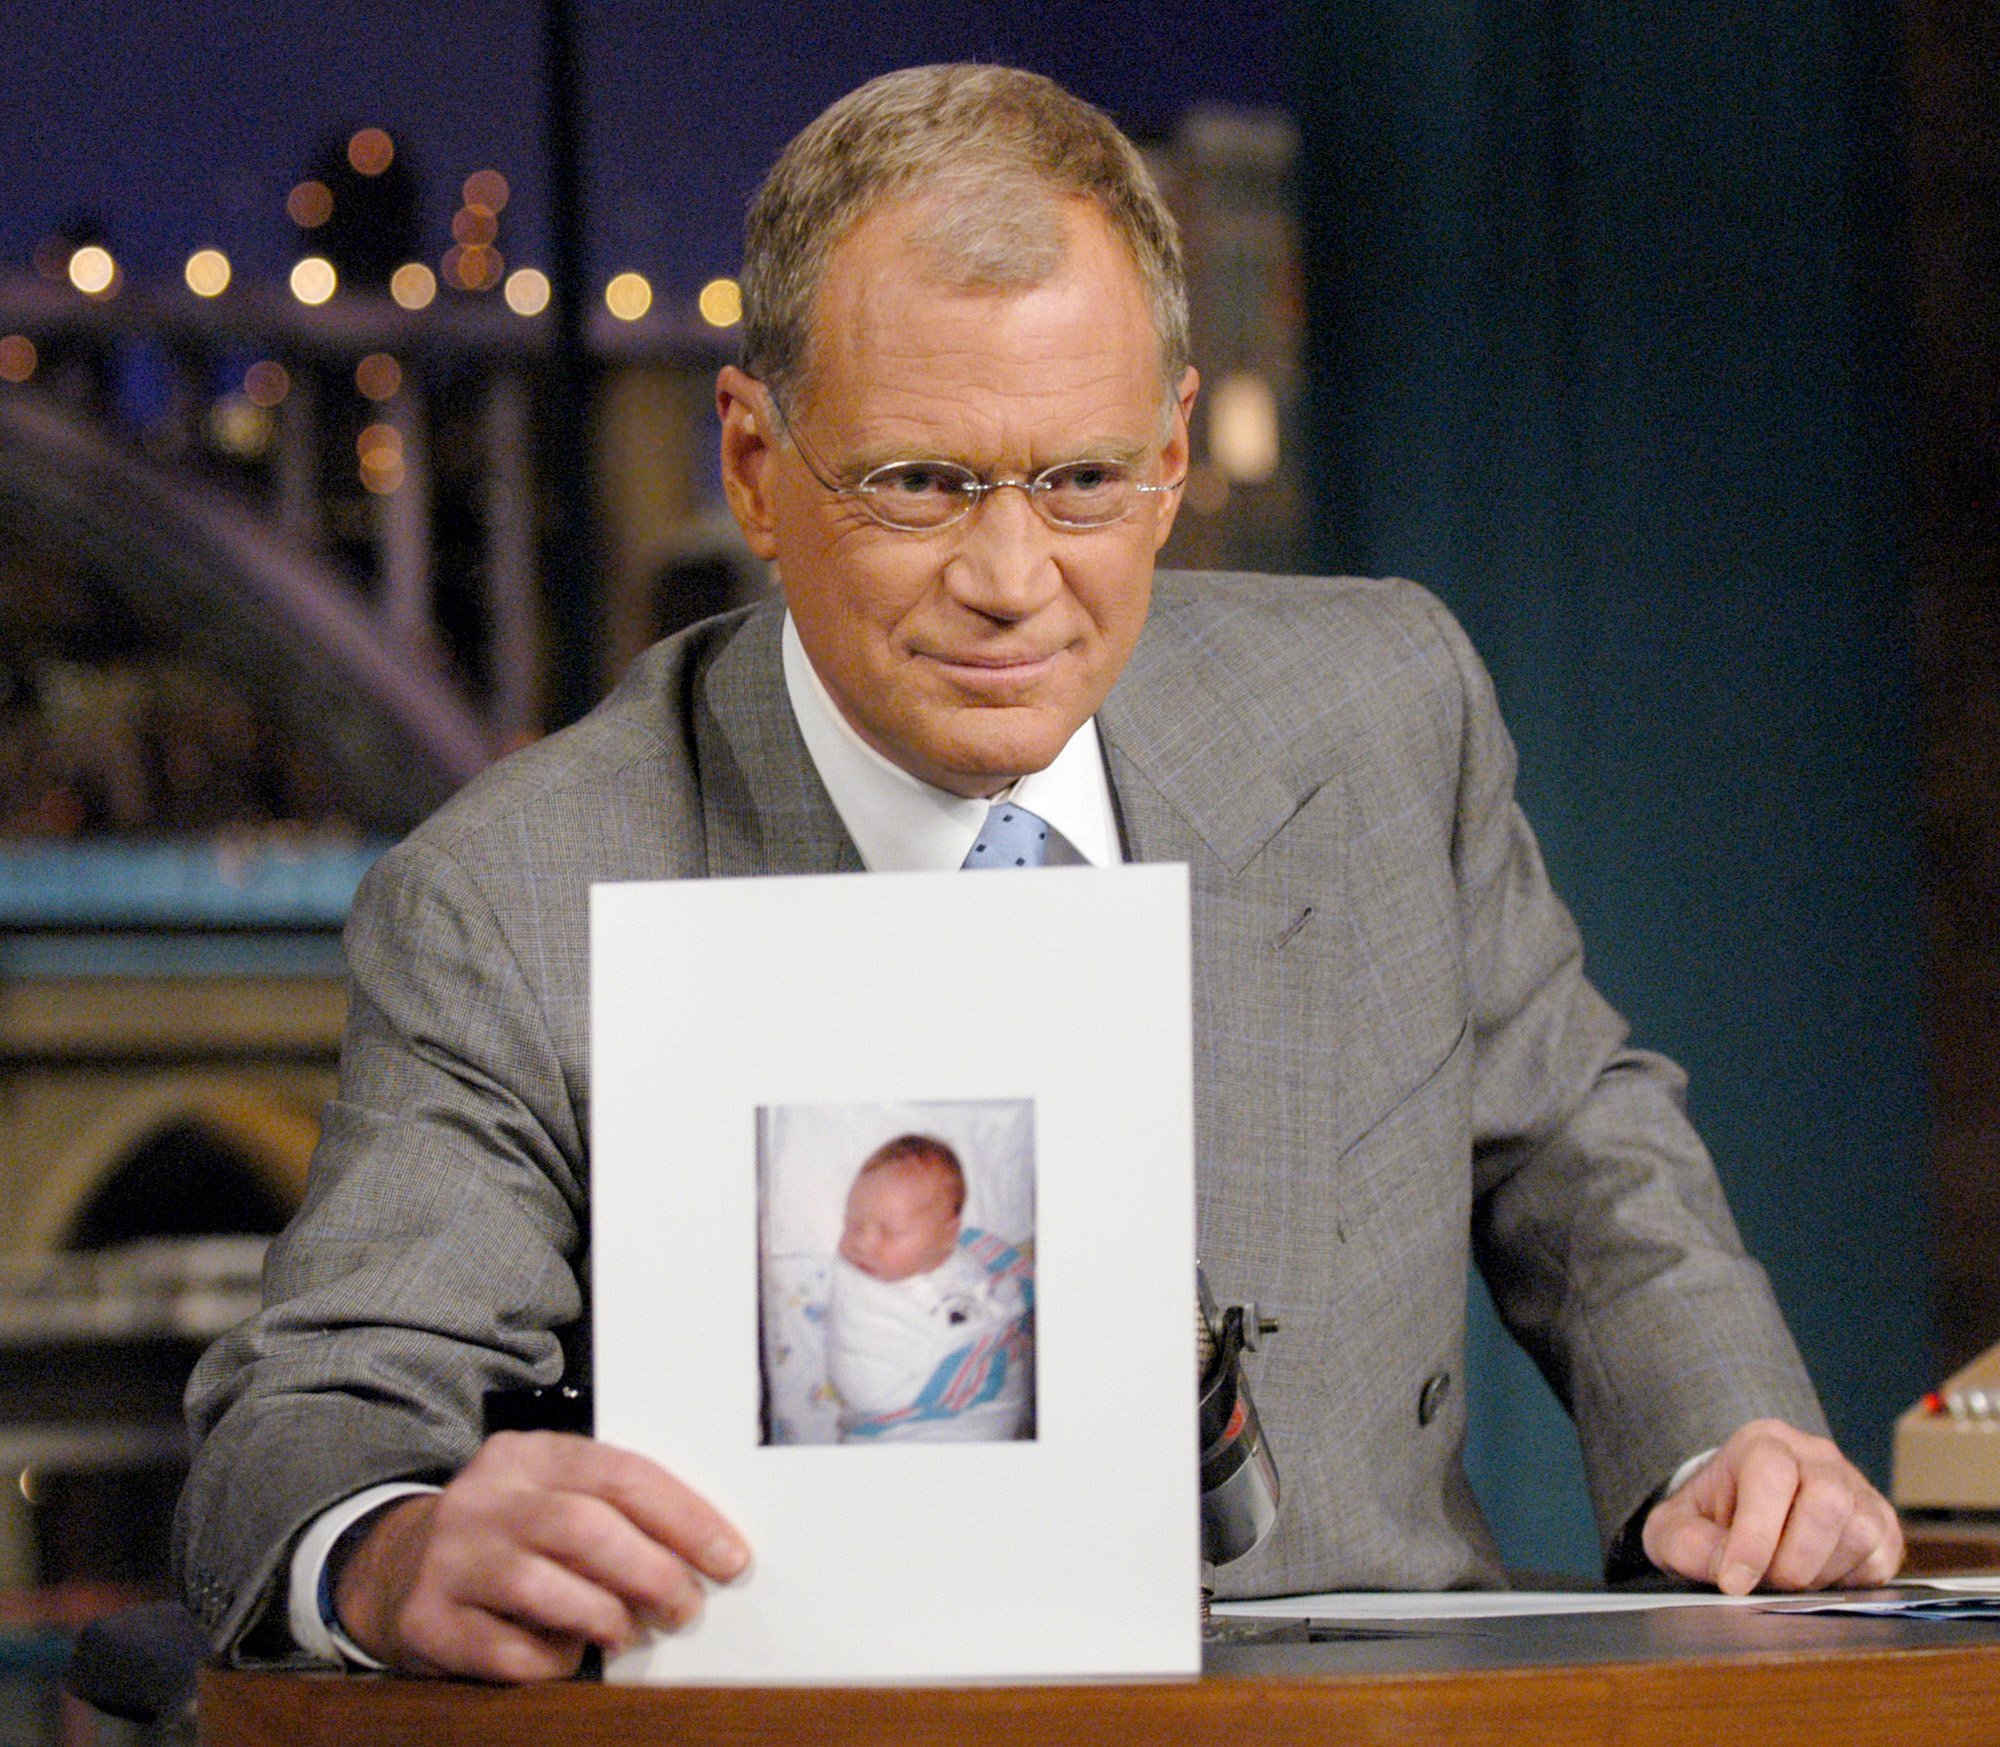 David Letterman holds a photo of his new son, Harry Joseph Letterman, on "The Late Show with David Letterman" on November 4, 2003 on the CBS Television Network I Source: Getty Images 